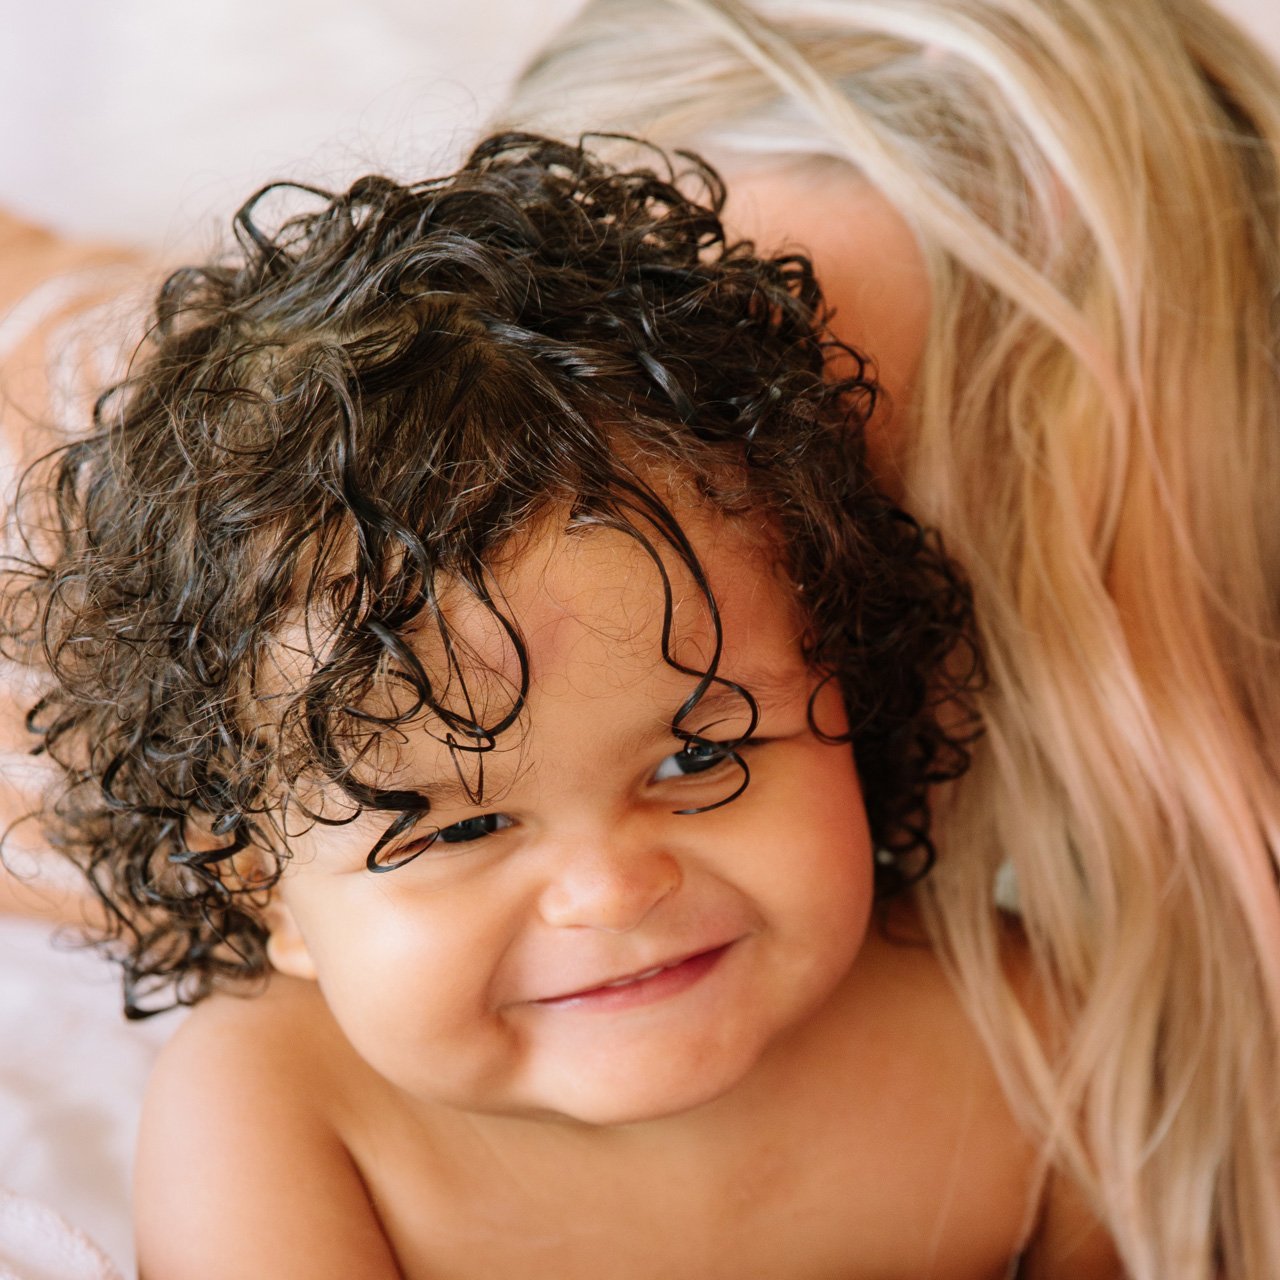 Mom cuddling toddler with curly hair